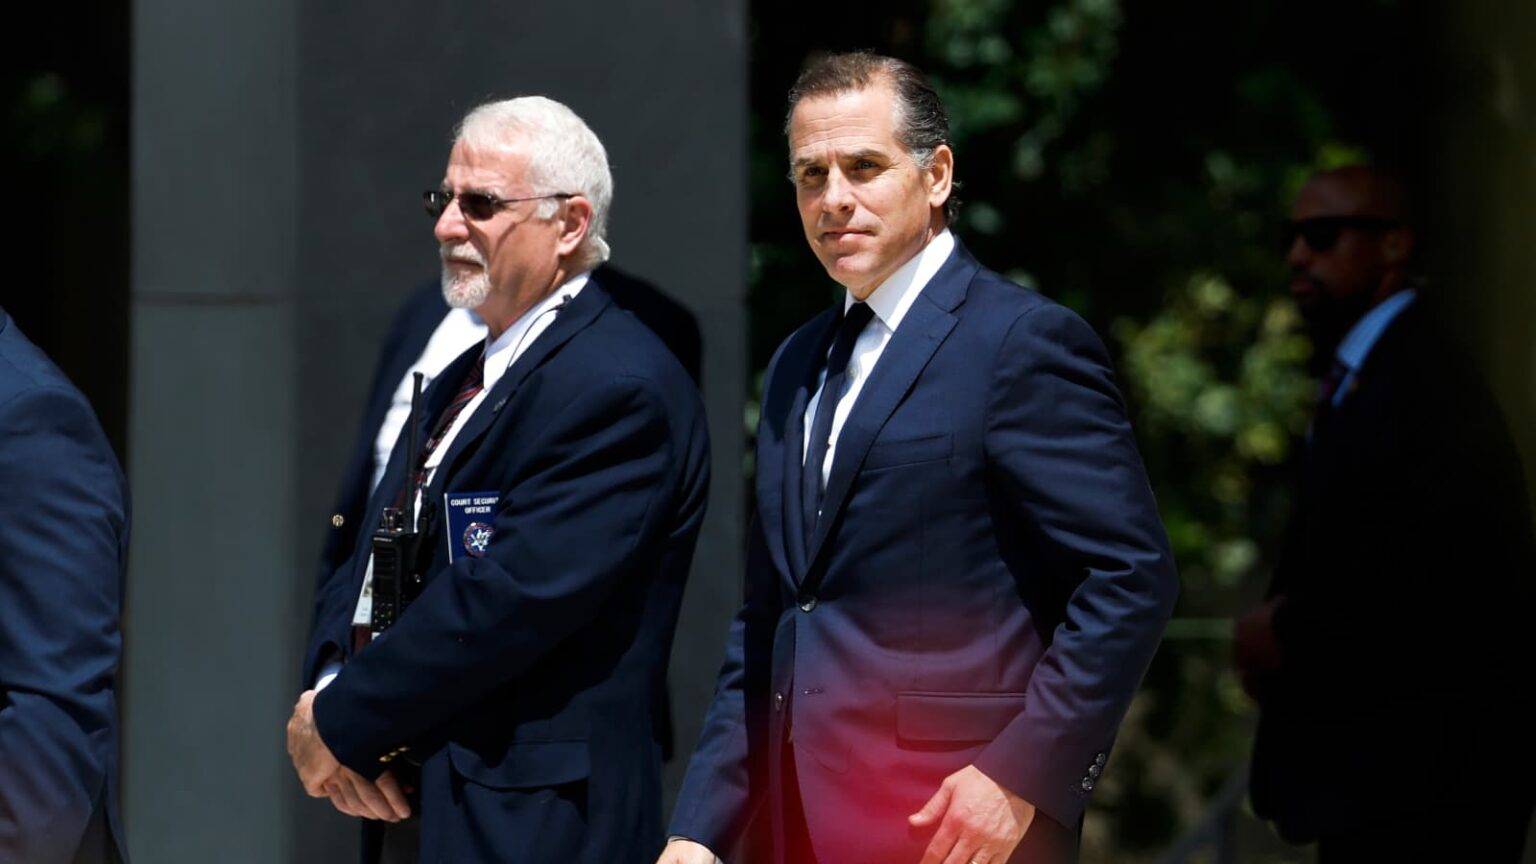 Hunter Biden’s plea deal collapses in dramatic court hearing